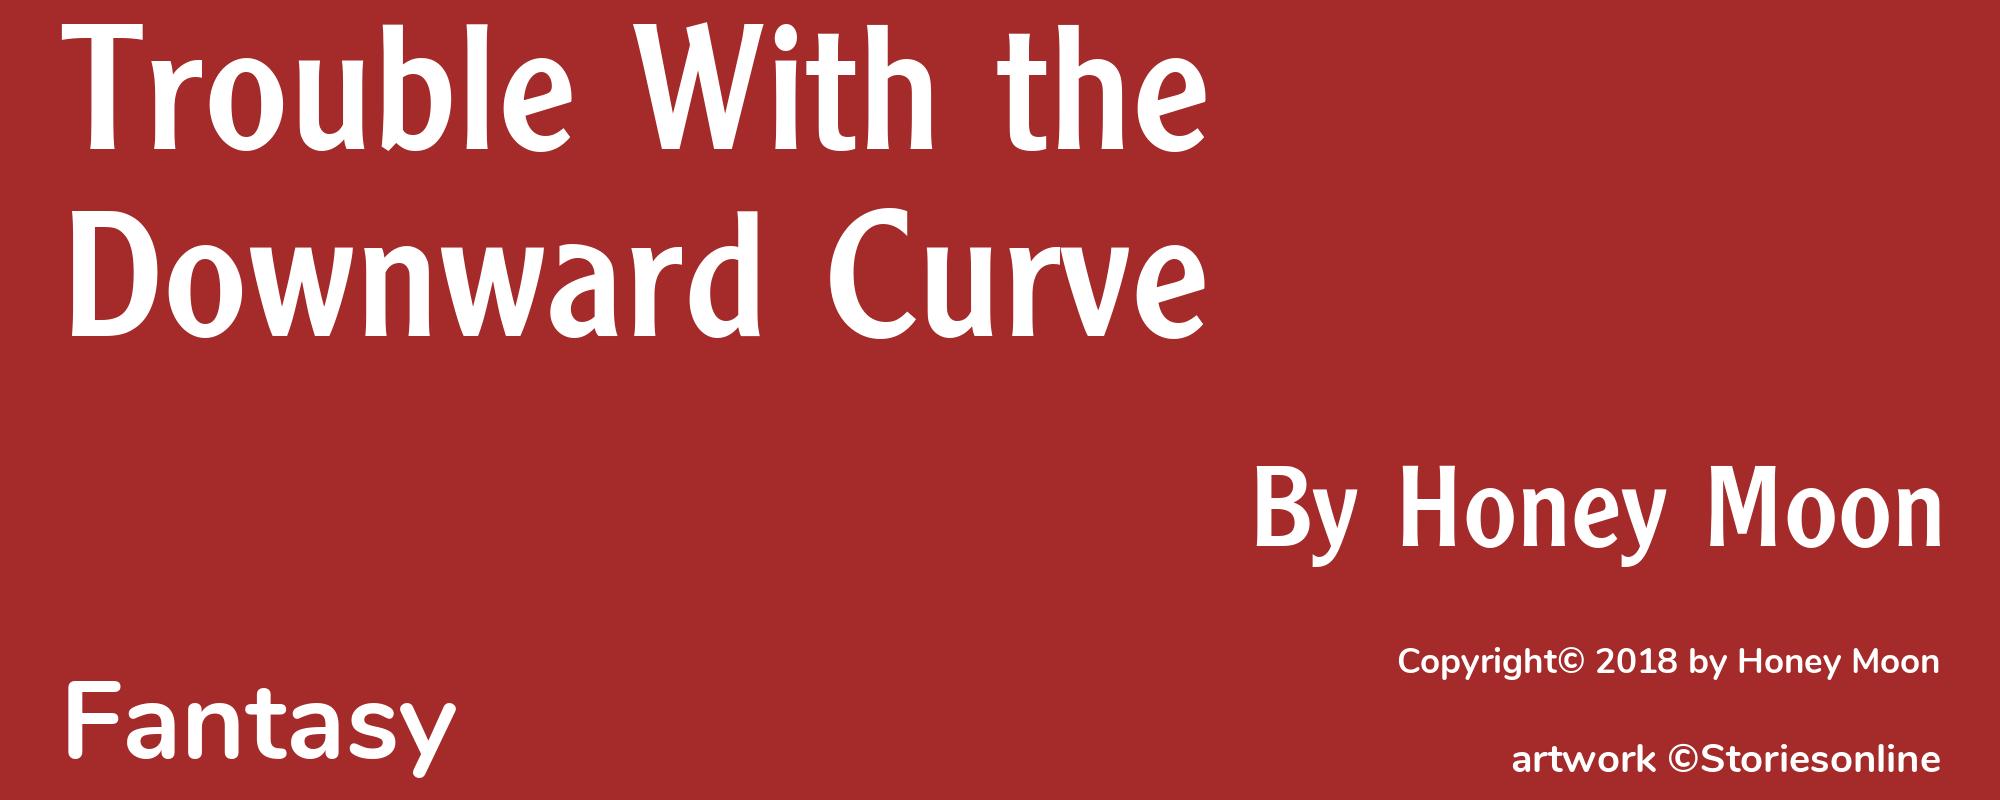 Trouble With the Downward Curve - Cover